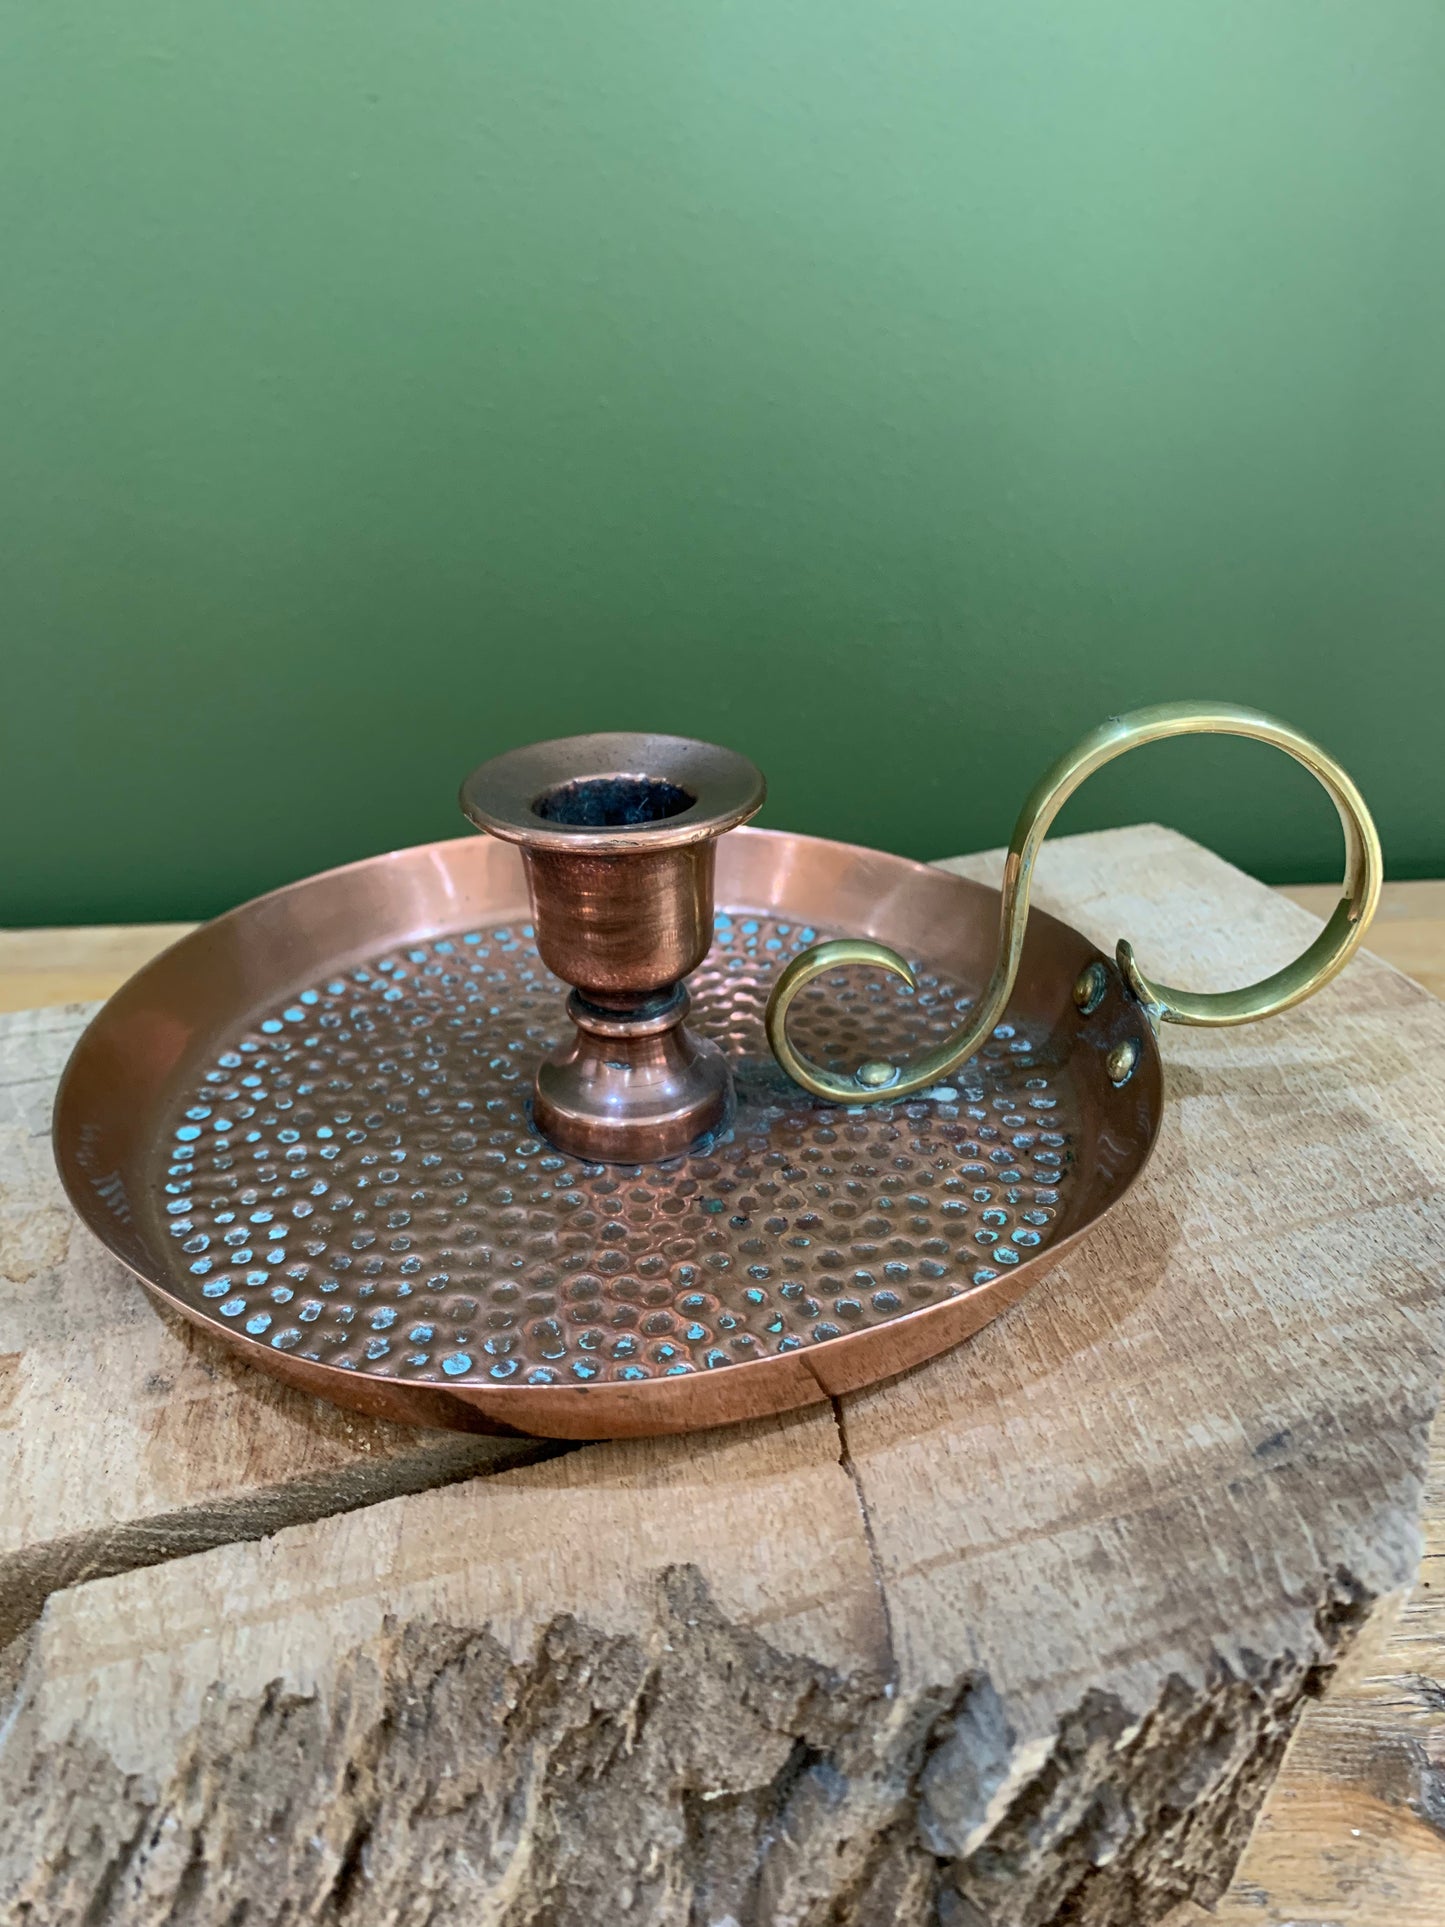 Antique Copper and Brass Candle Holder - Vintage Elegance and Timeless Beauty